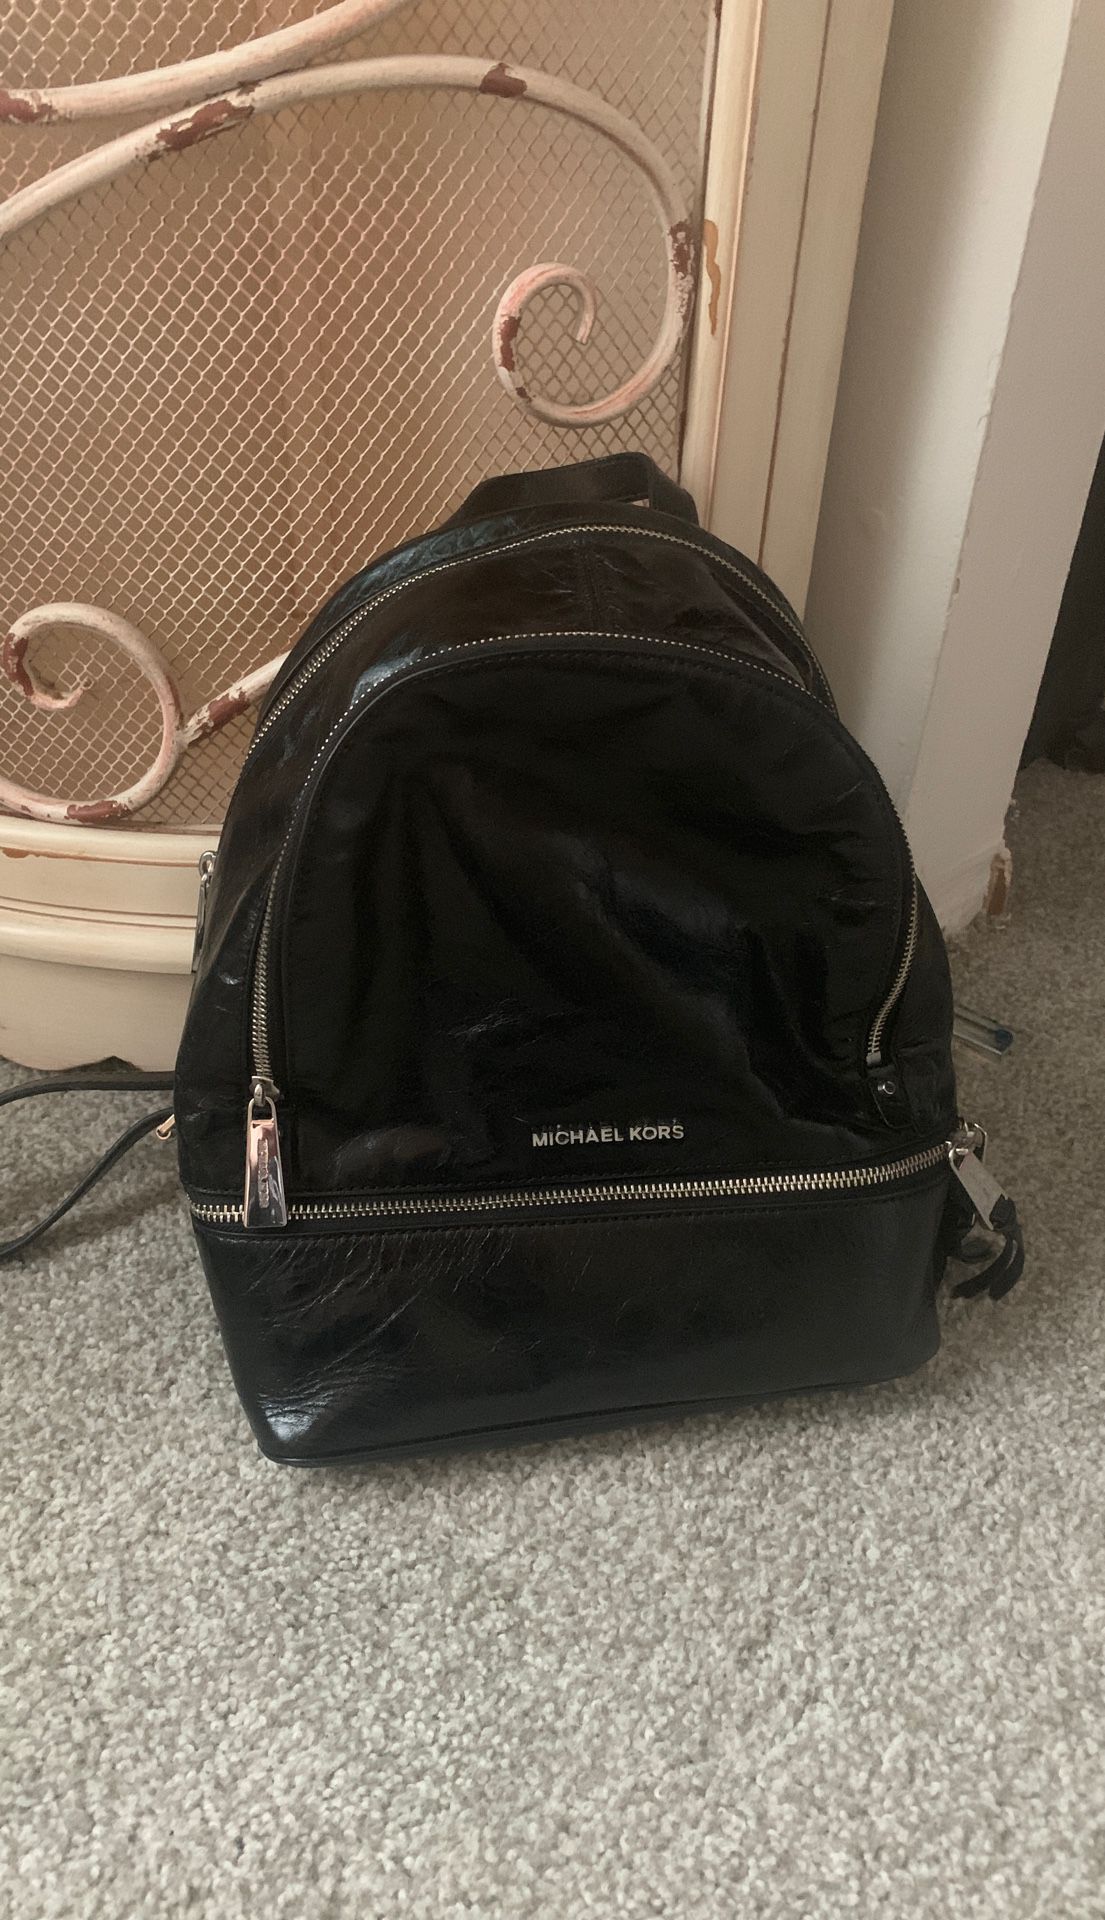 Authentic Michael Kors black leather backpack